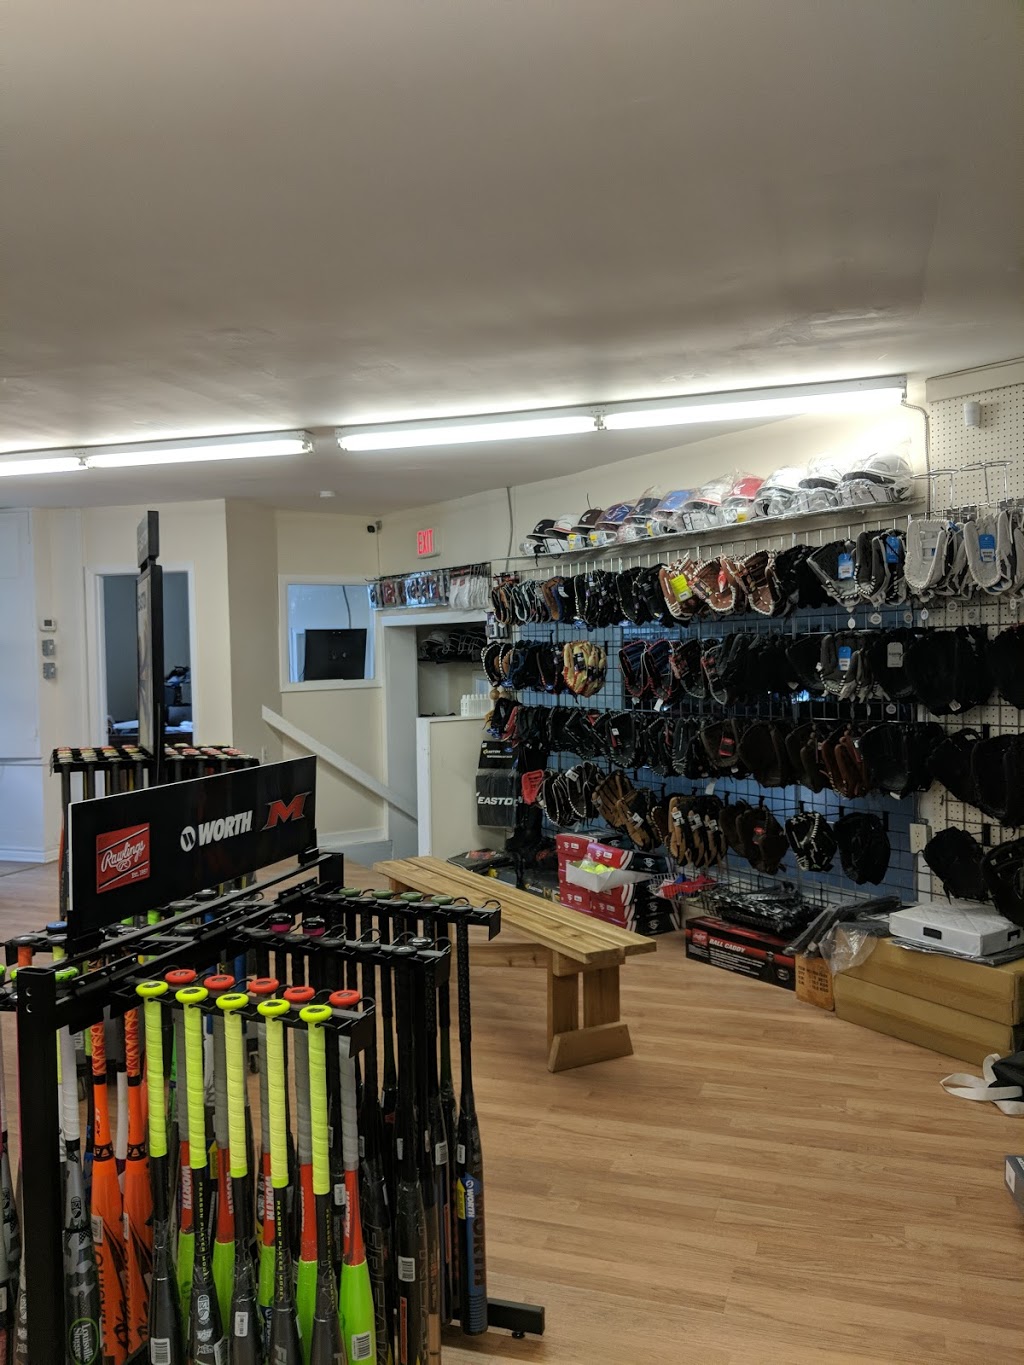 Smash It Sports Canada Stores | store | 20 Monteith Ave, Stratford, ON N5A 2P4, Canada | 8882196268 OR +1 888-219-6268